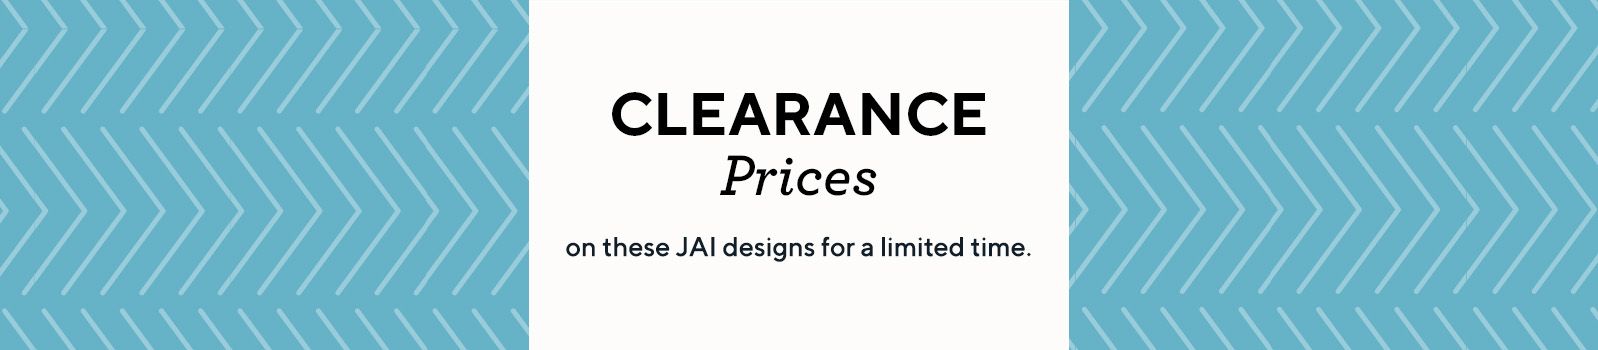 Clearance Prices on these JAI designs for a limited time.